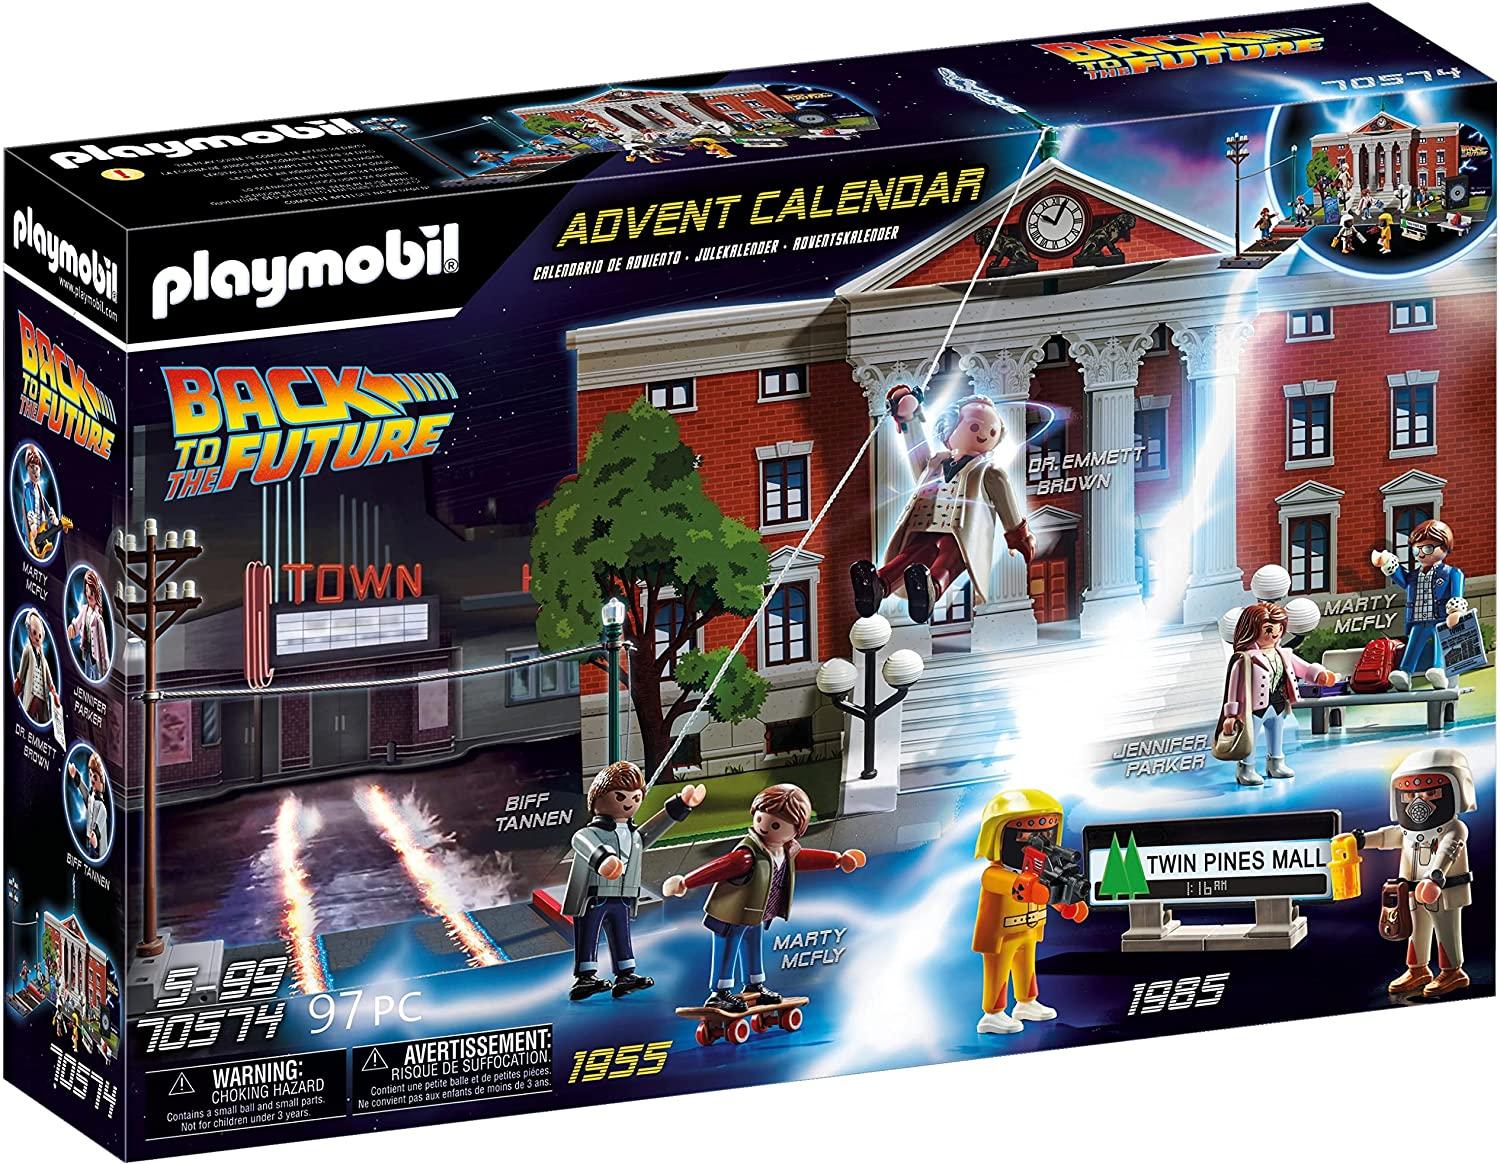 Playmobil Back To The Future Advent Calendar for $17.99